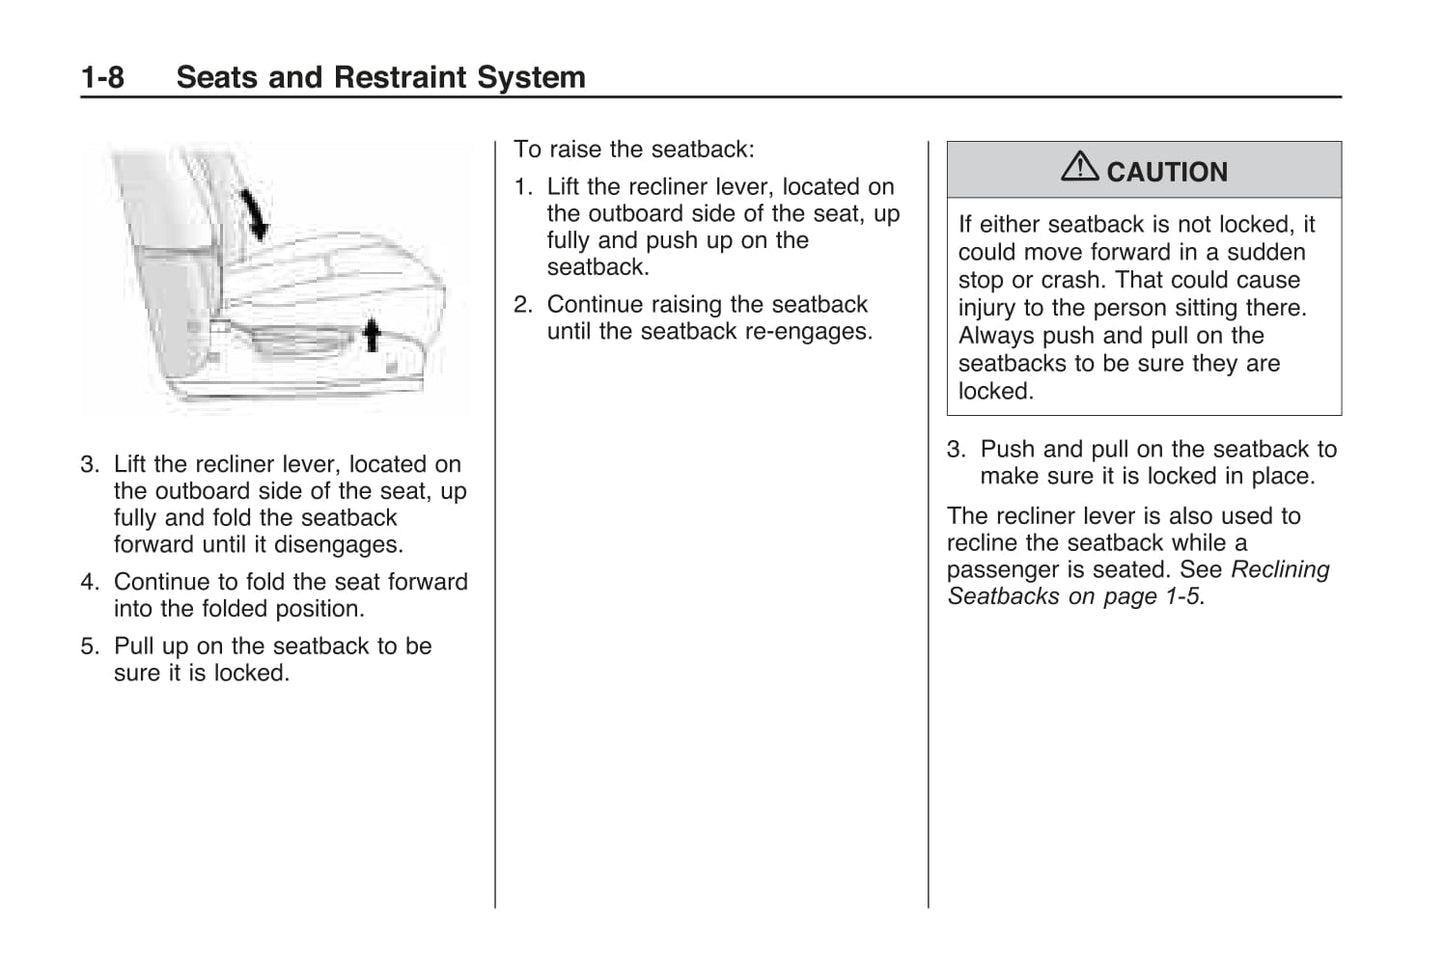 2009 Saturn Vue Owner's Manual | English